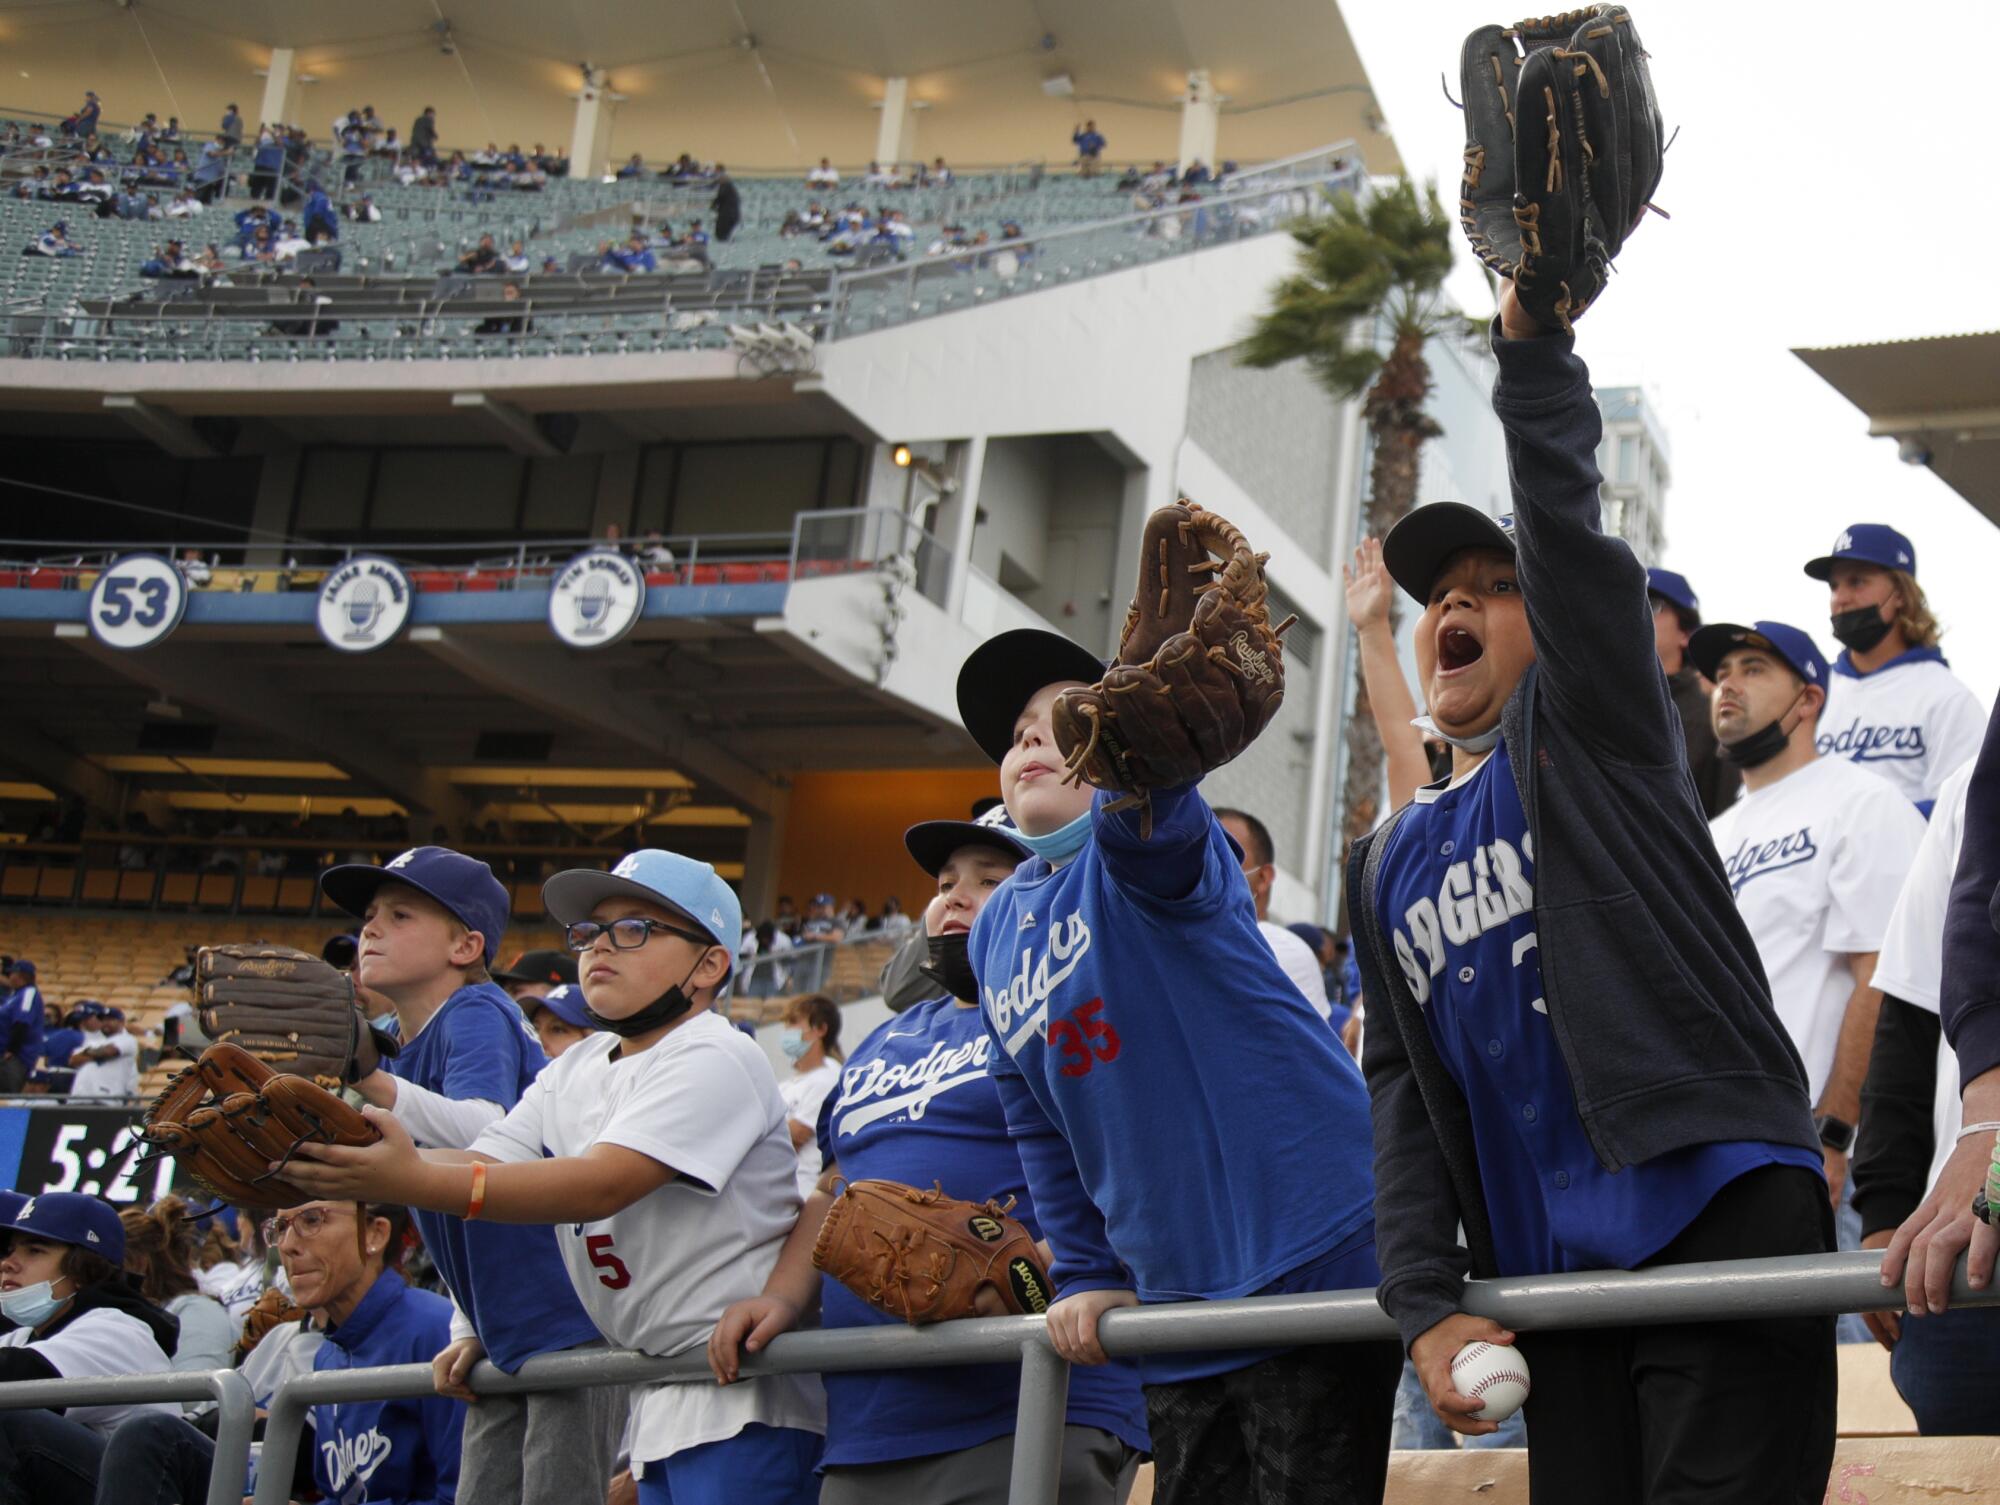  Dodgers fans cheer for a ball during batting practice.